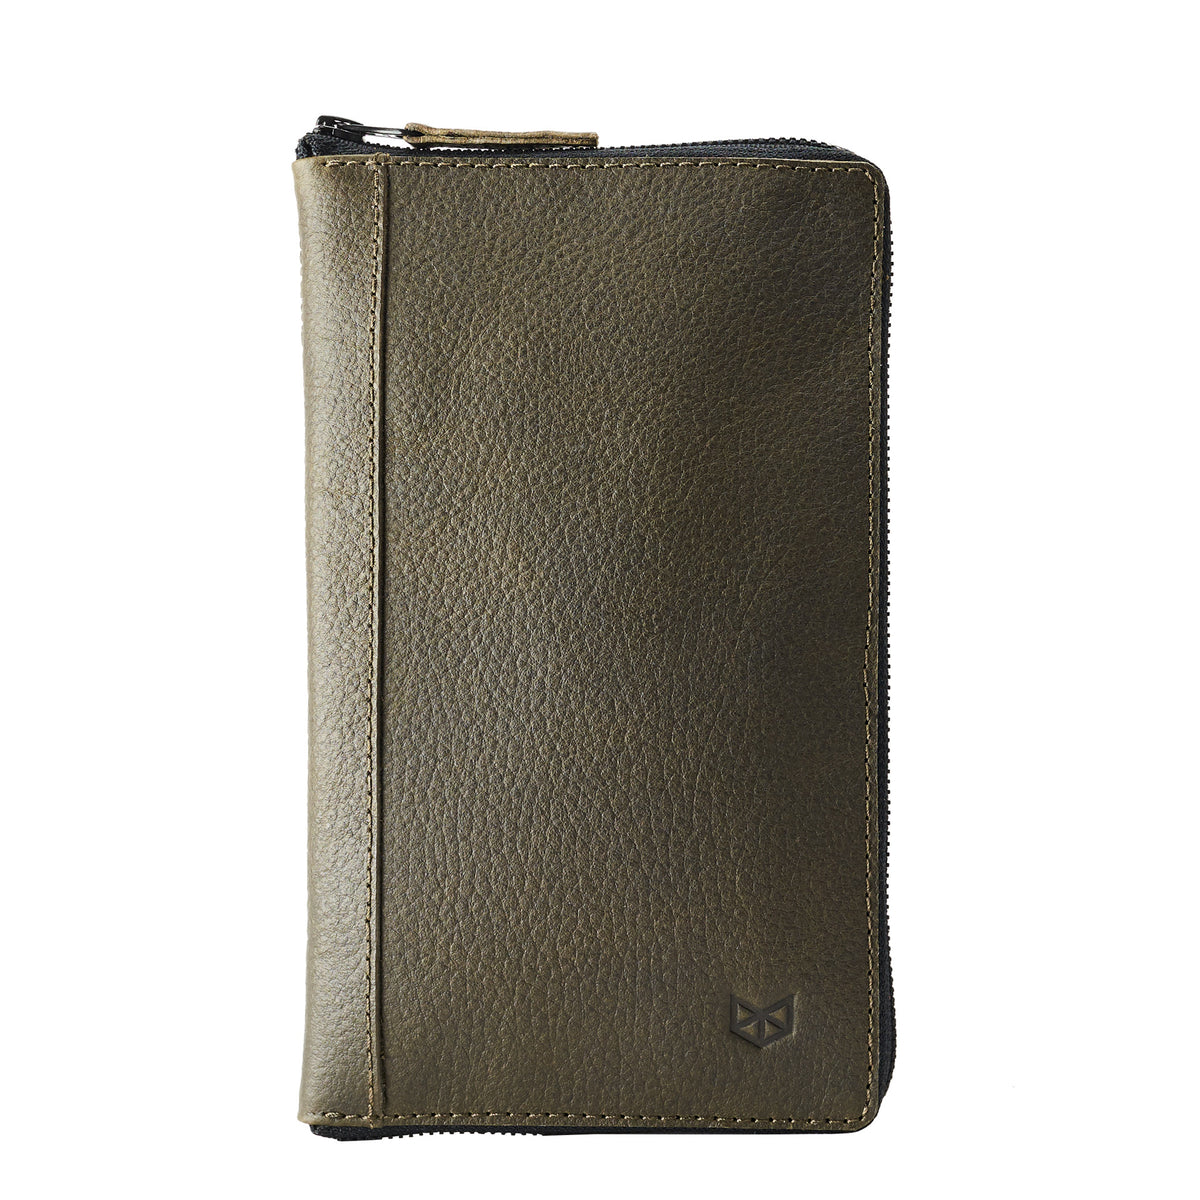 Green leather passport wallet. Perfect for travelers. Gift for men by Capra Leather.